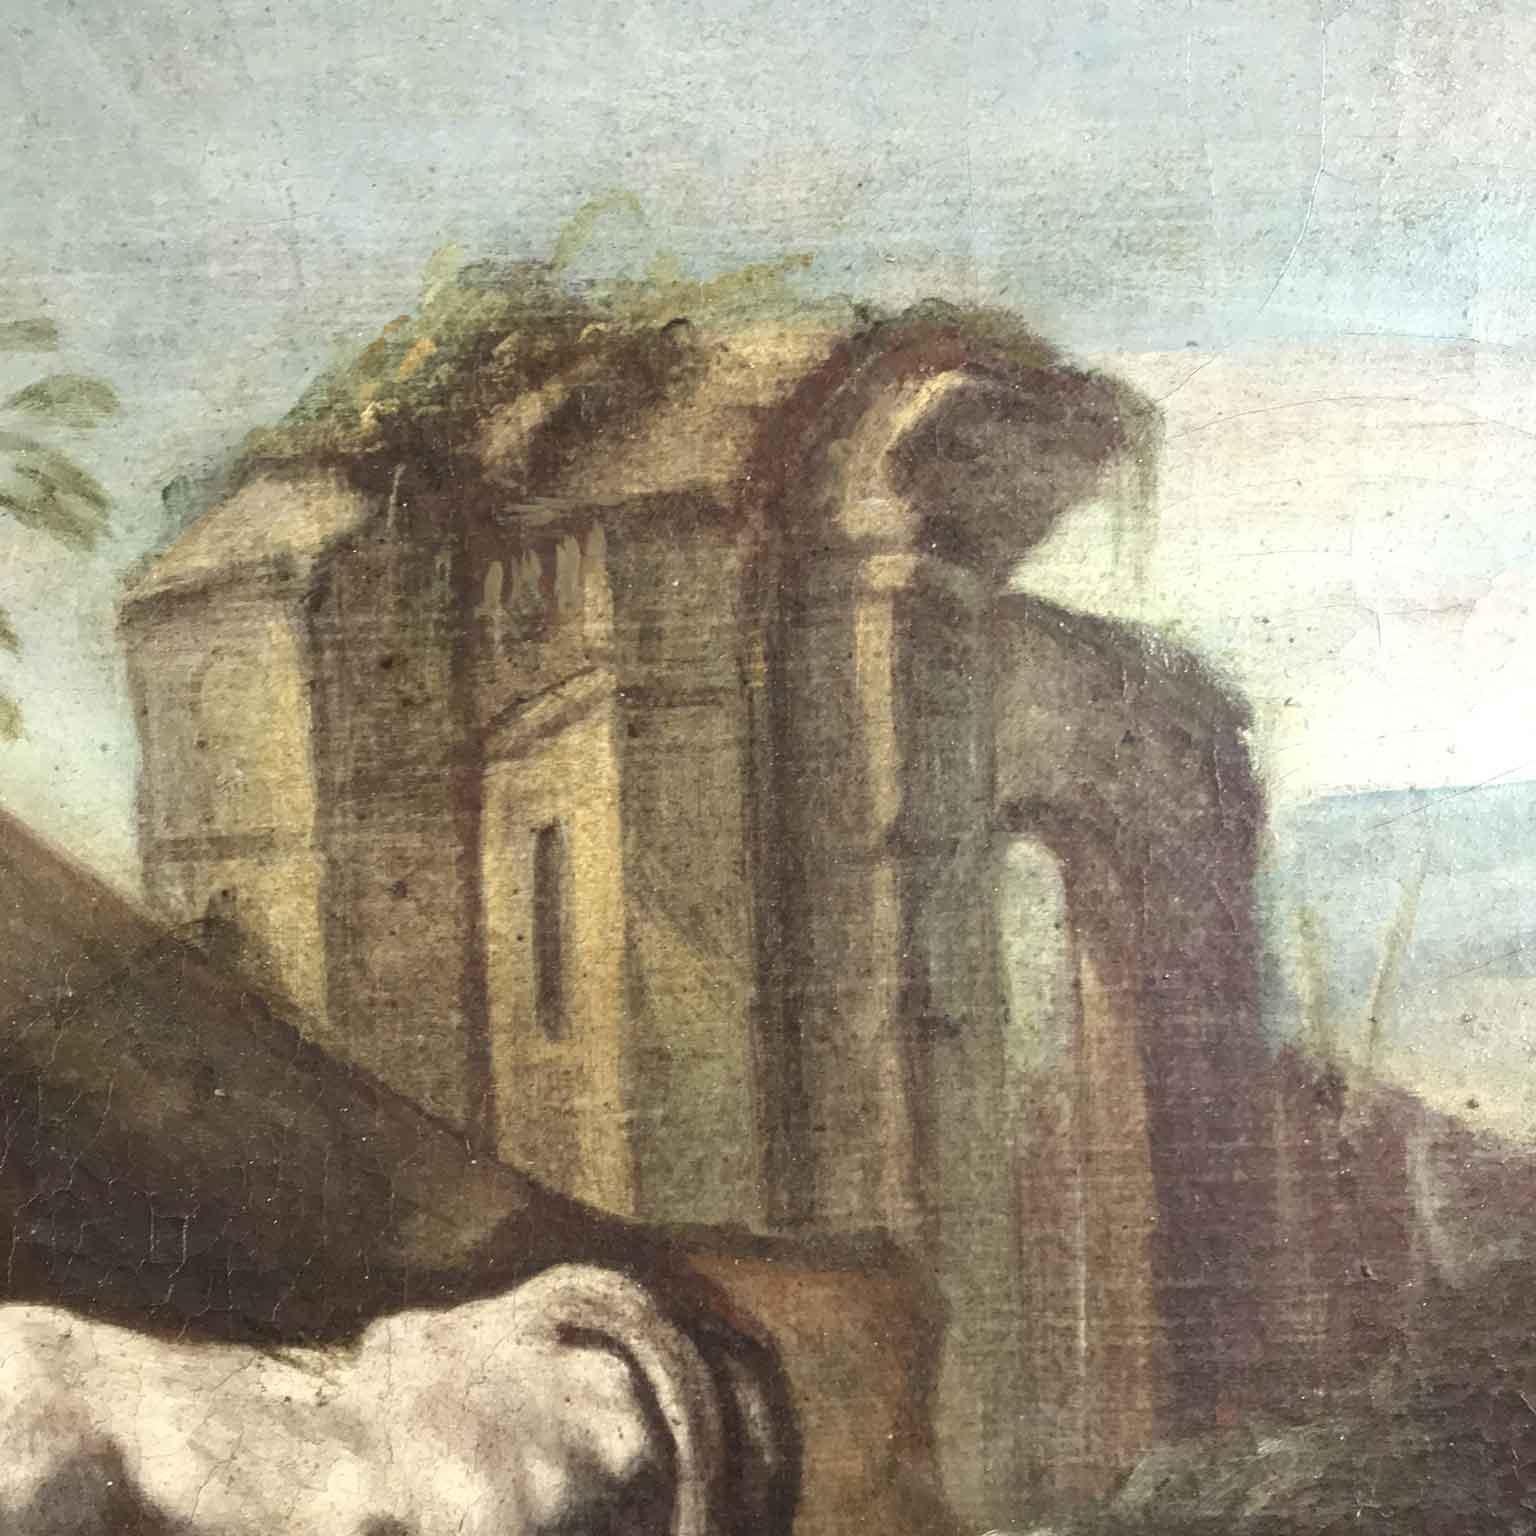 Canvas Italian 18th Century Neoclassical Bucolic Landscape with Ruins Figures Herds